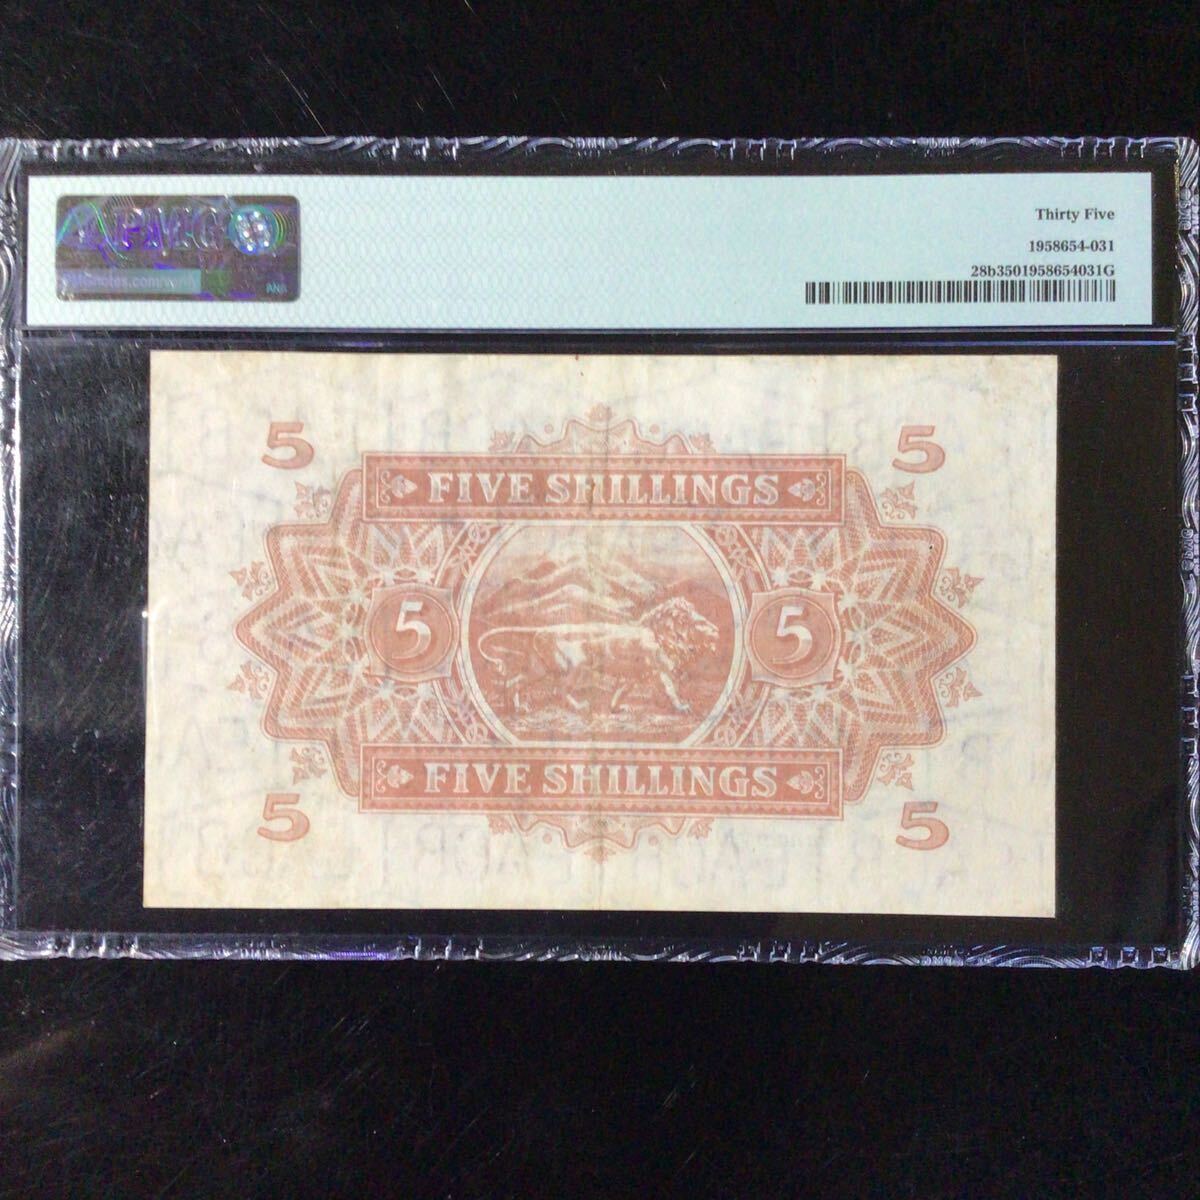 World Banknote Grading EAST AFRICA《Currency Board》5 Shillings【1952】『PMG Grading Choice Very Fine 35』_画像2